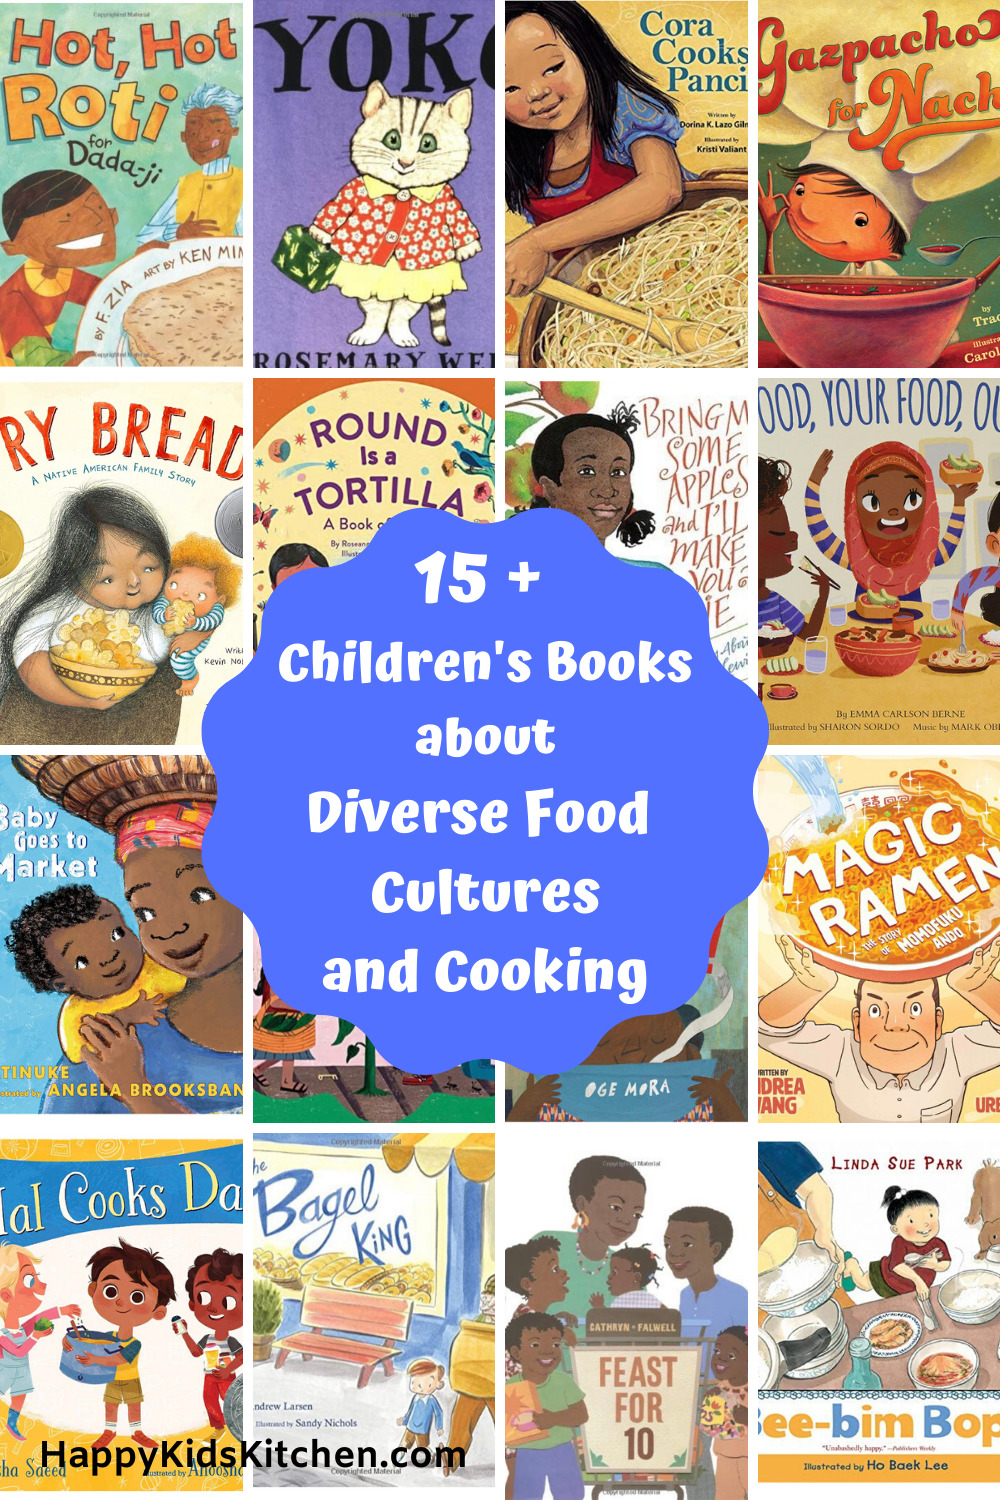 https://happykidskitchen.com/wp-content/uploads/2020/07/15-Childrens-Books-about-Diverse-Cultures-and-Food.jpg